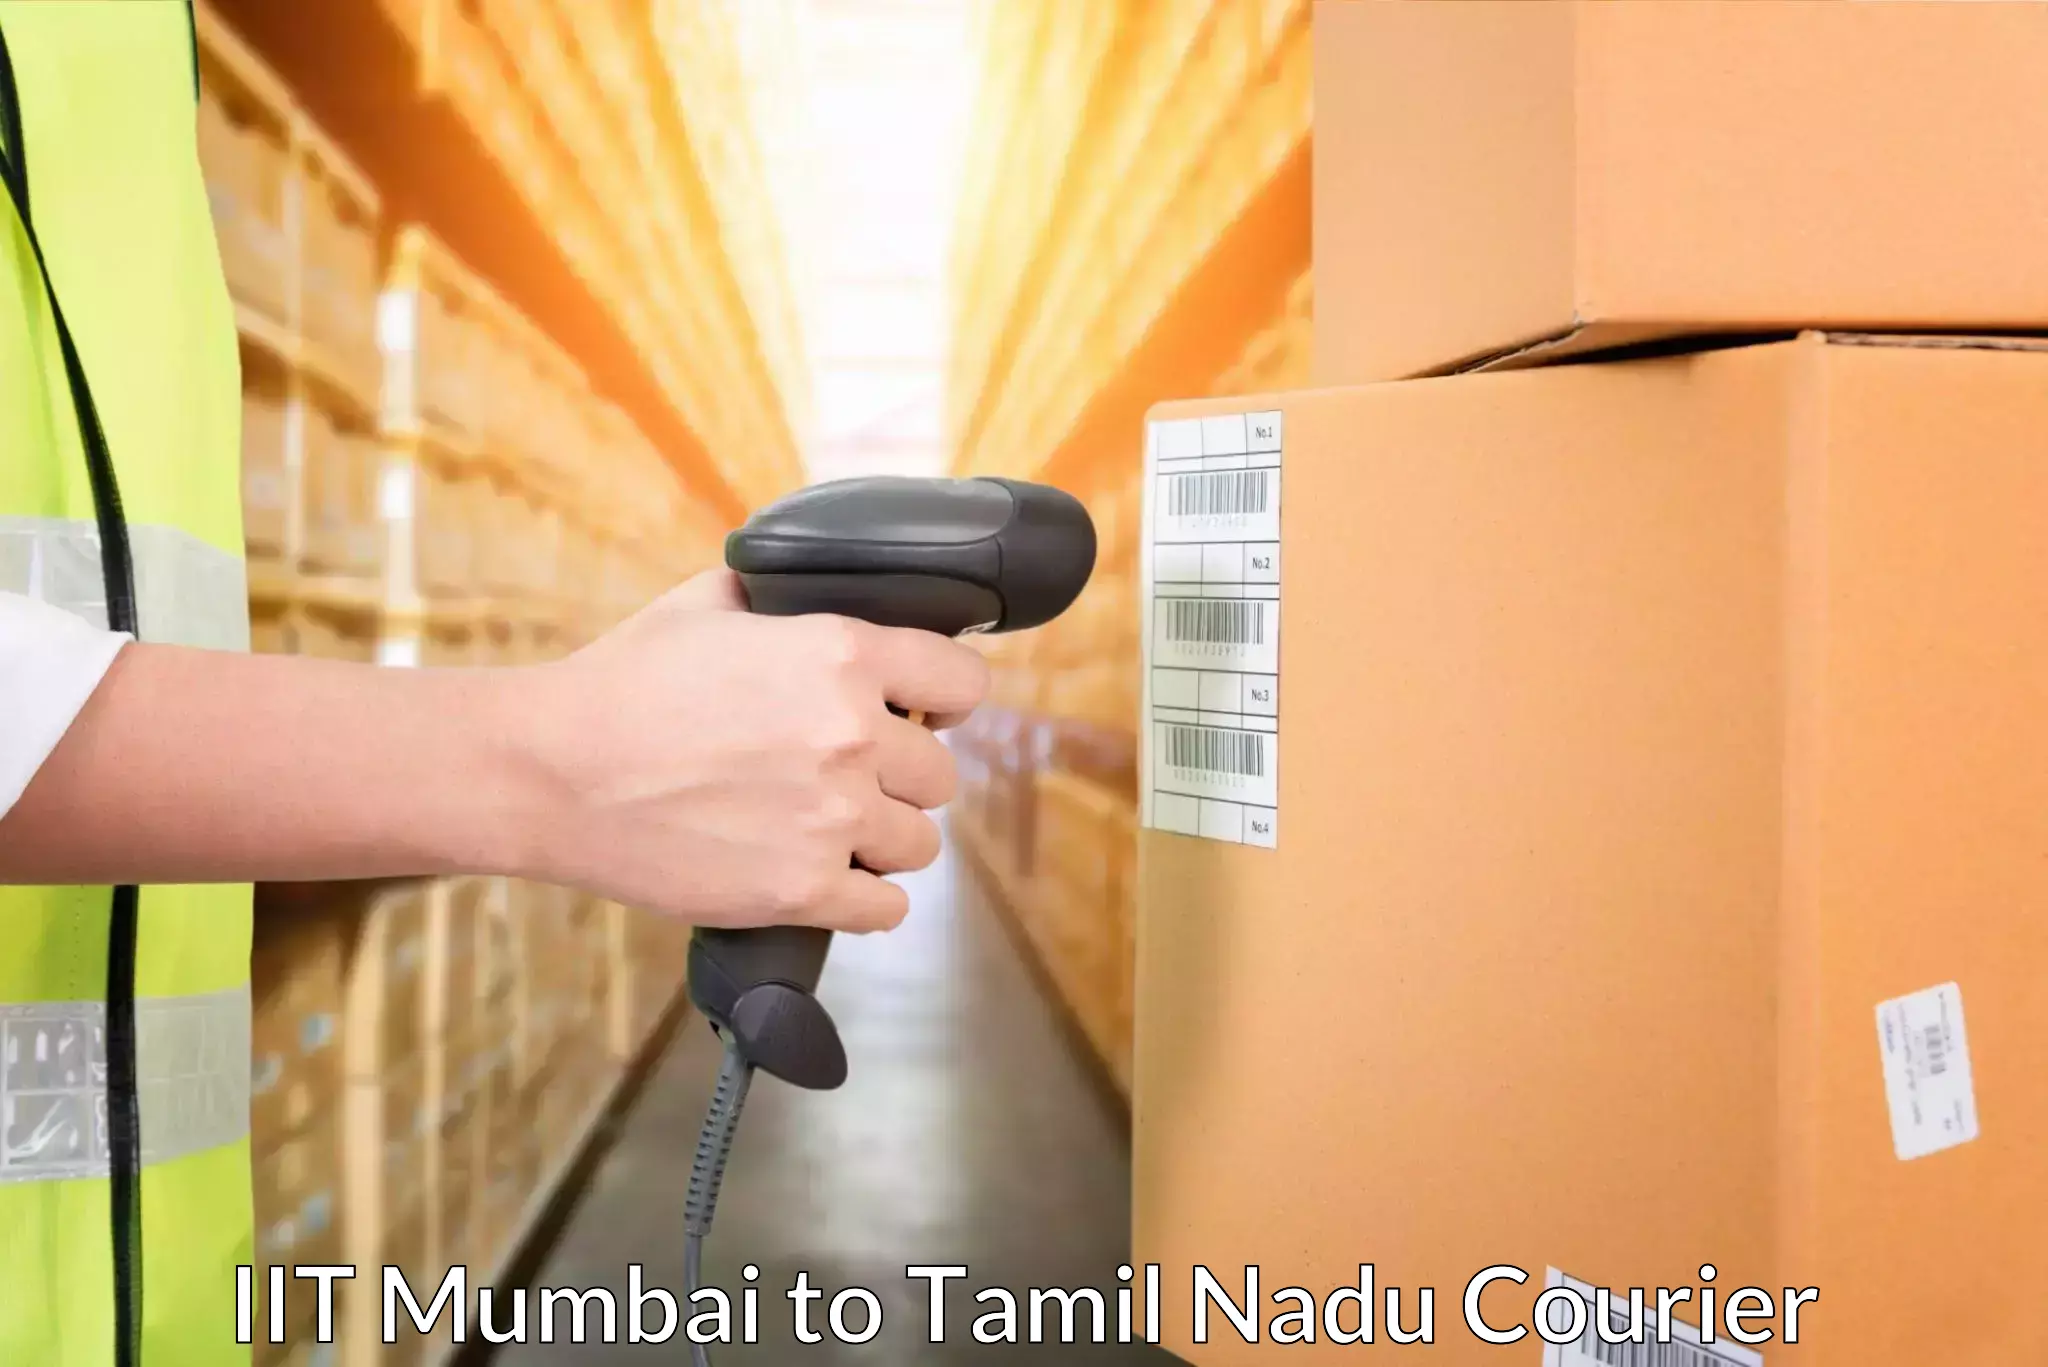 Parcel service for businesses IIT Mumbai to Tamil Nadu